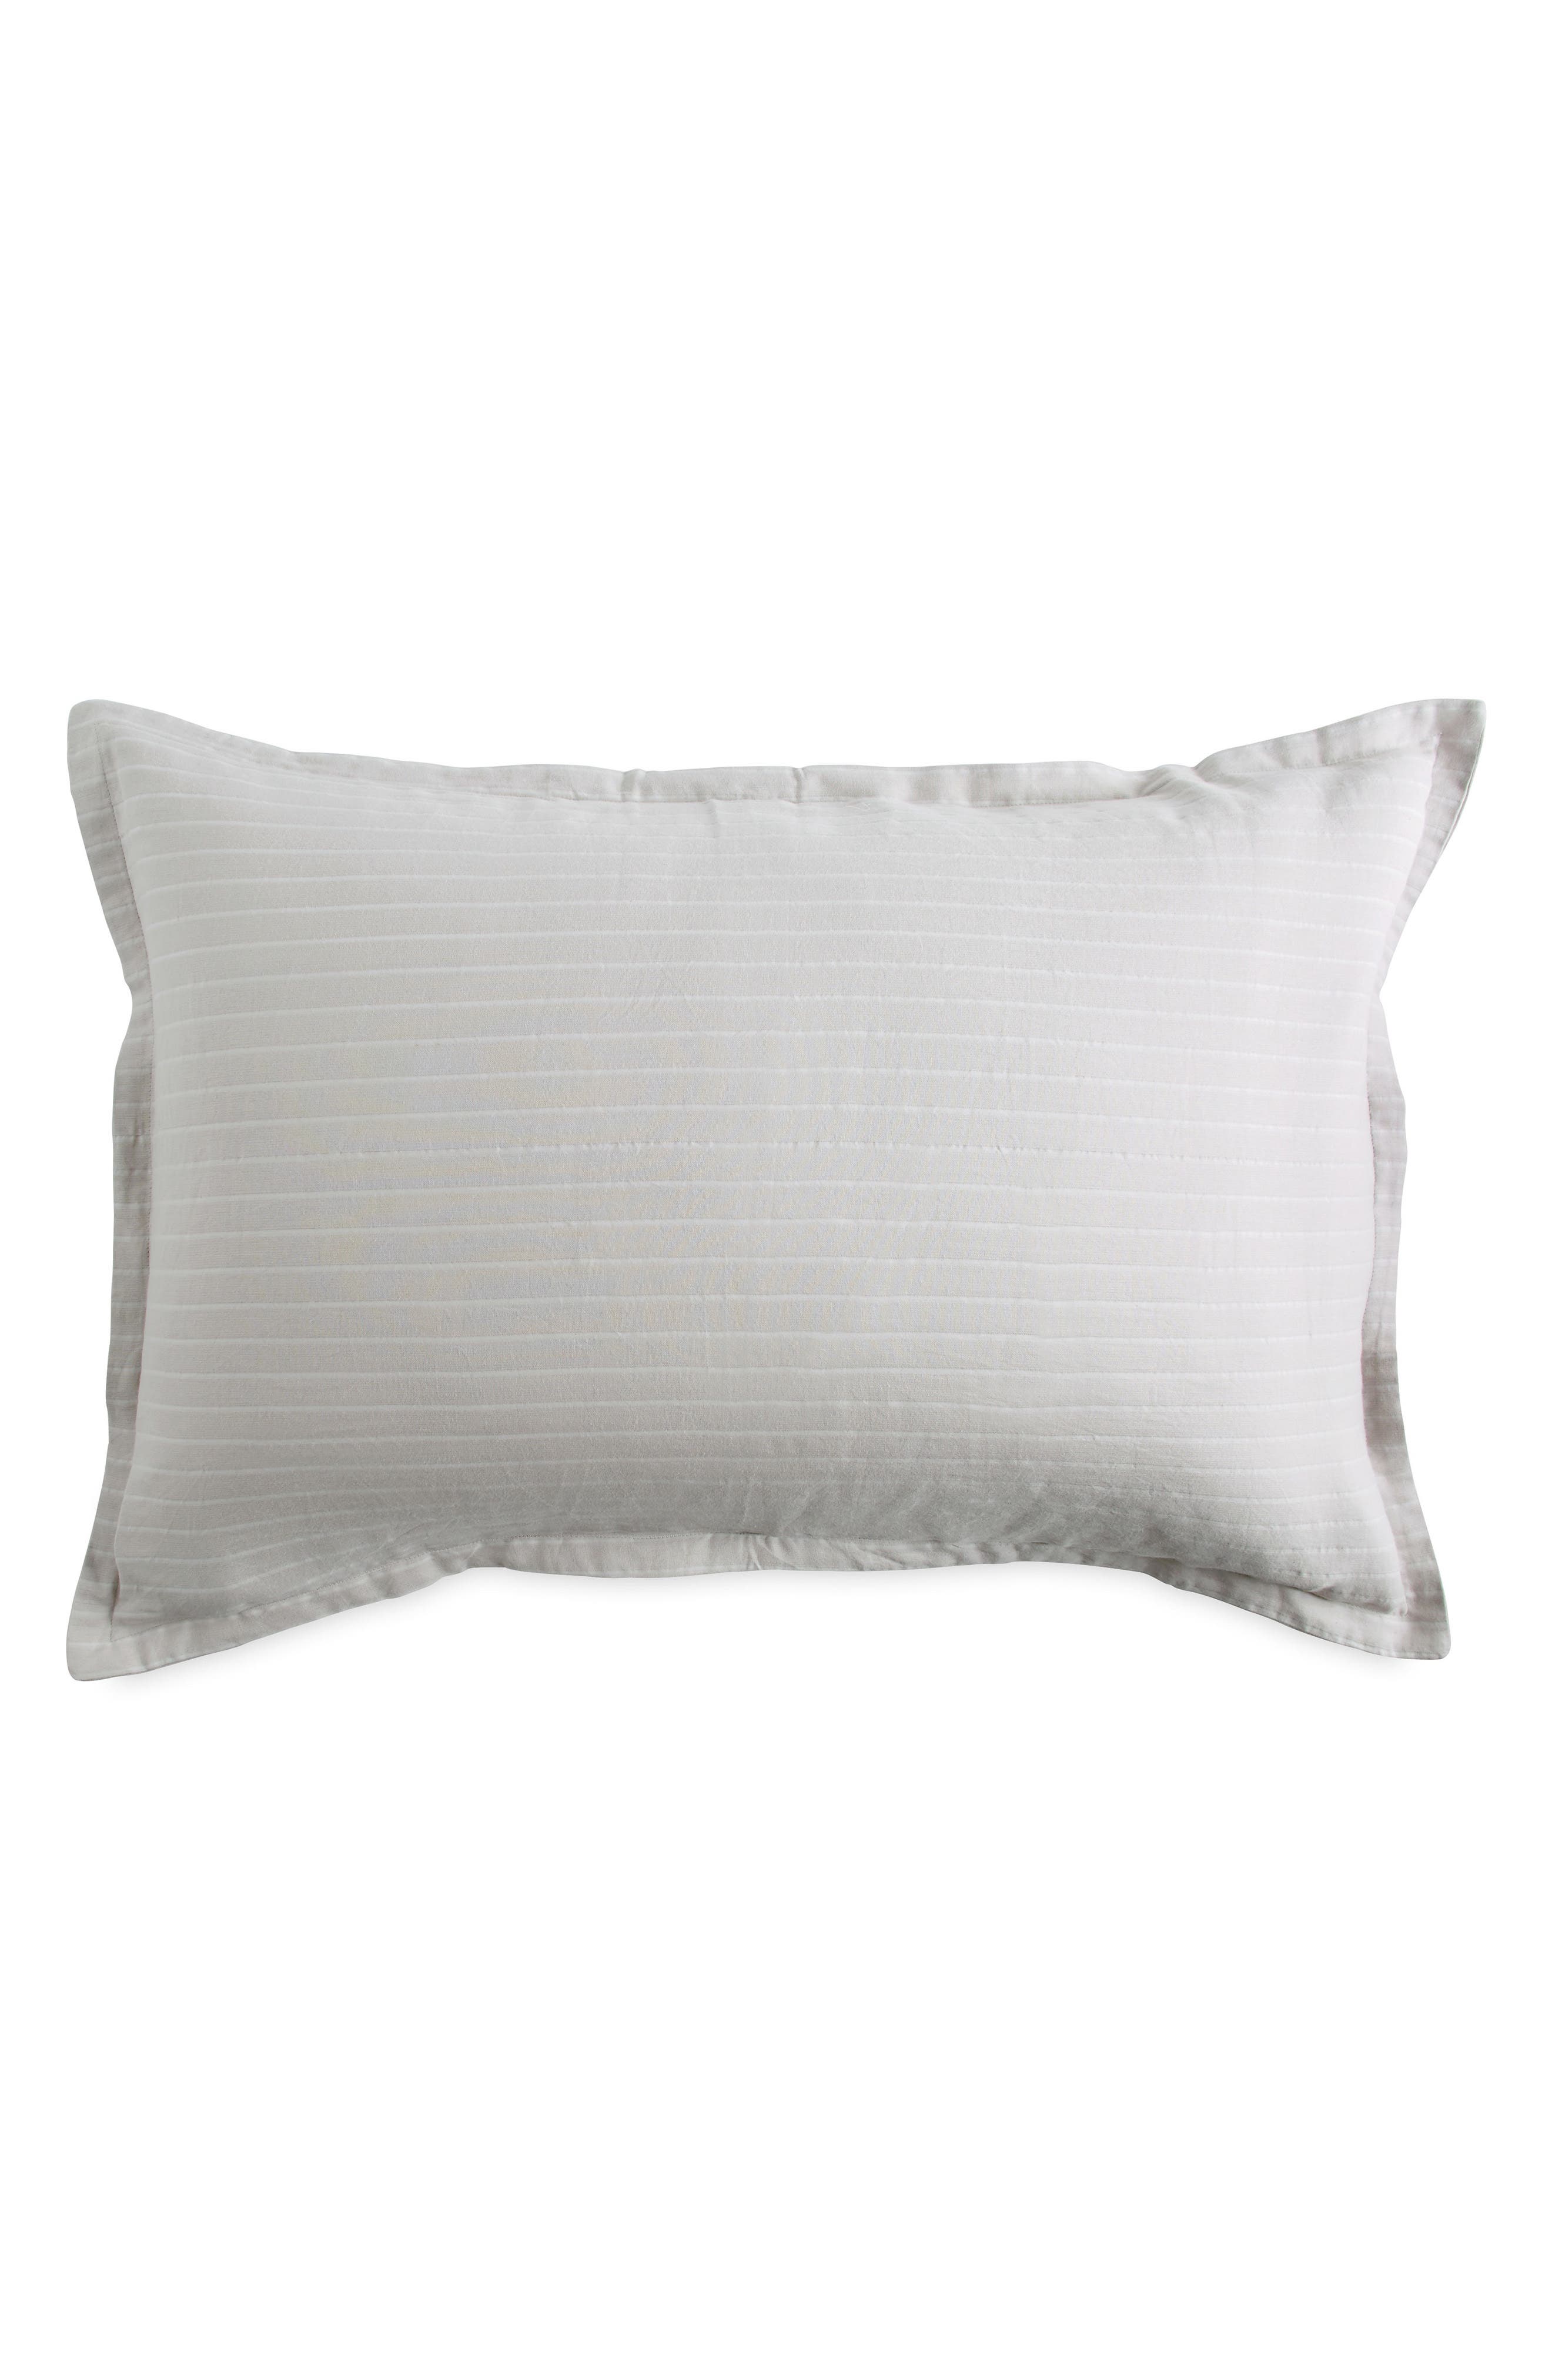 DKNY PURE Comfy Platinum Pillow Sham at Nordstrom, Size King